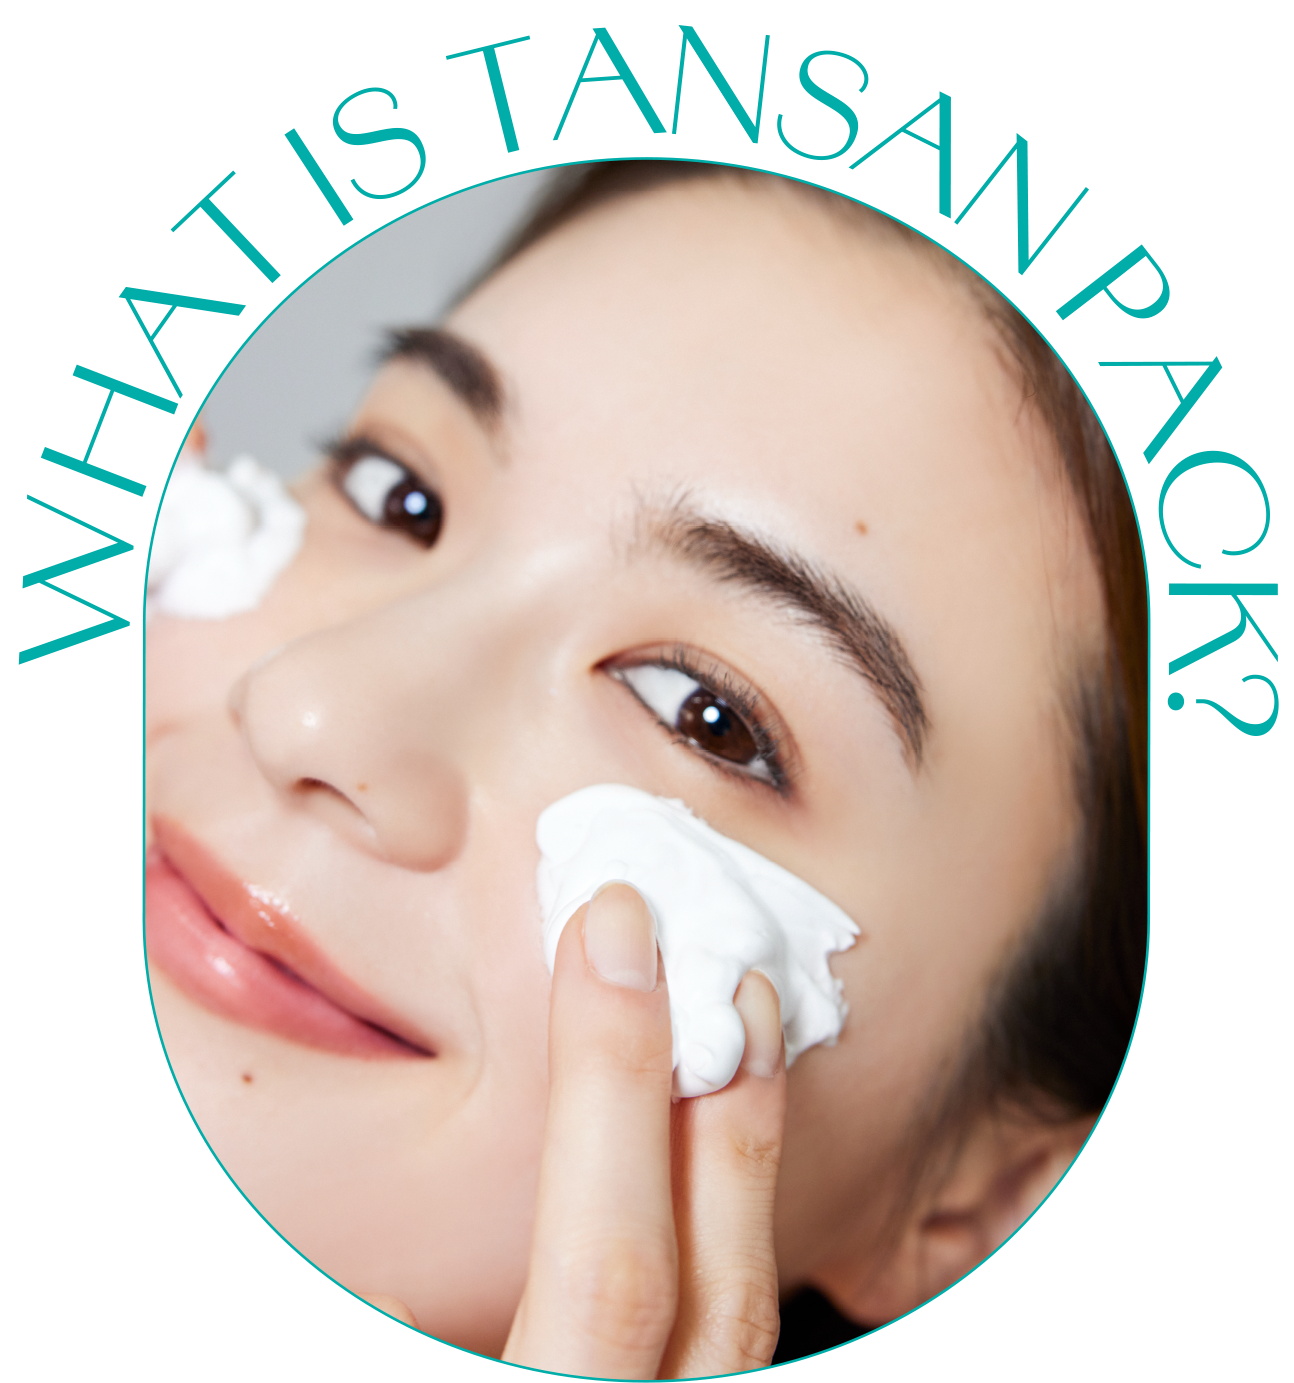 WHAT IS TANSAN PACK?